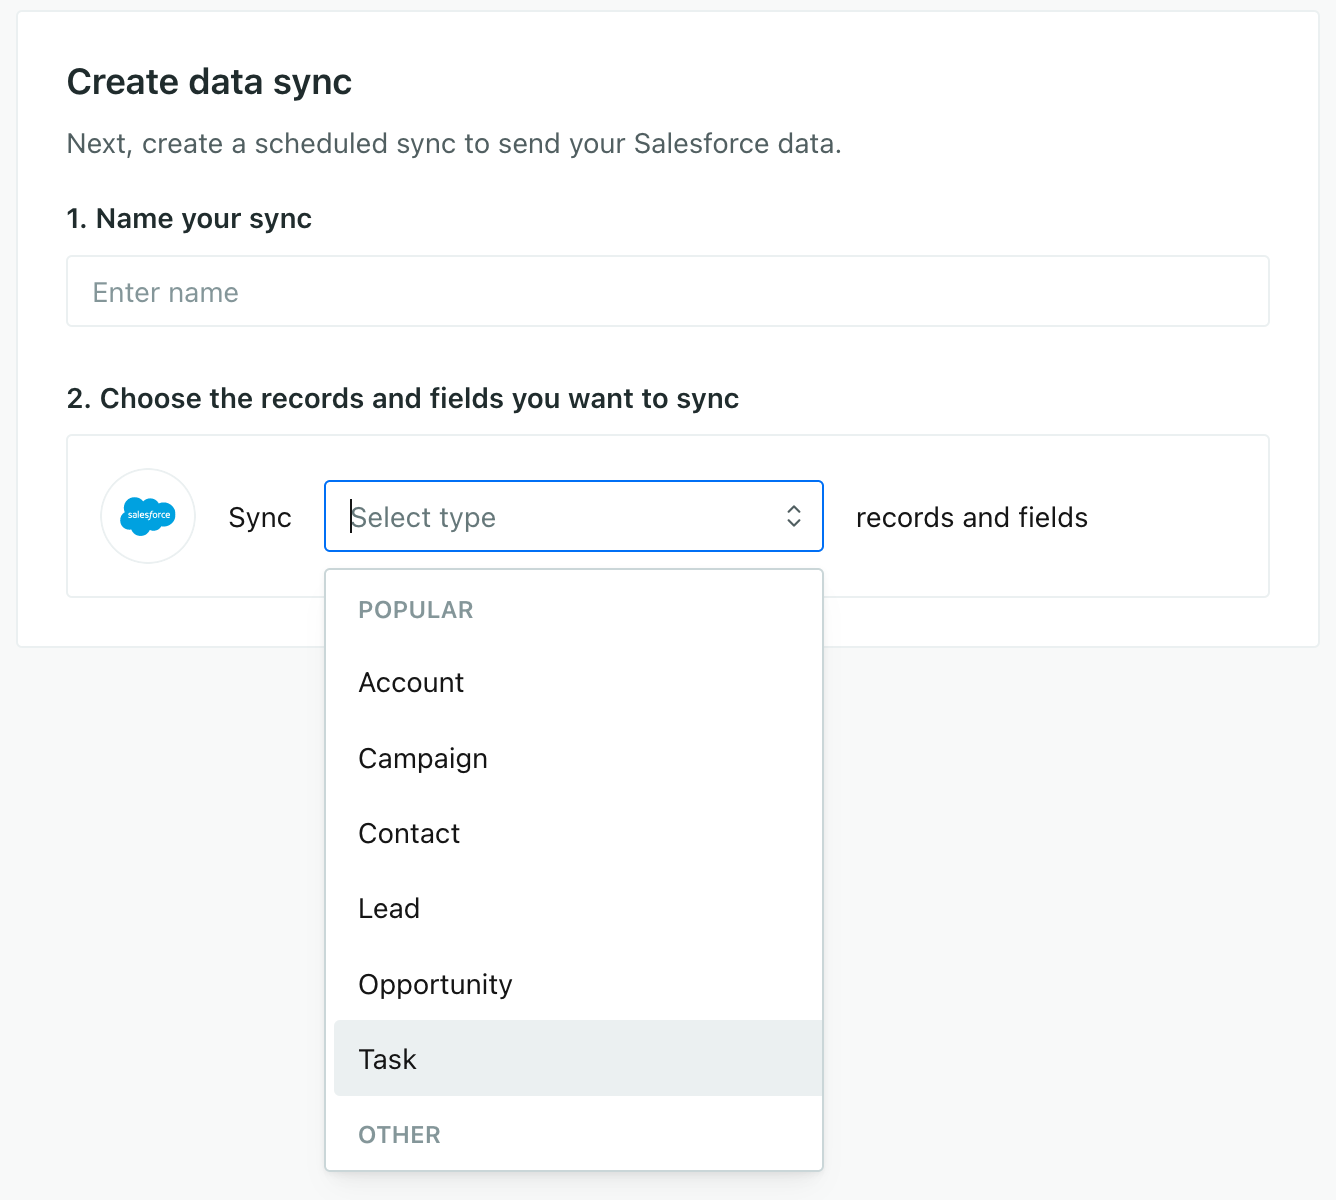 when you create a sync, you'll select the type of salesforce data you want to import, starting with popular data types and moving on to other data types